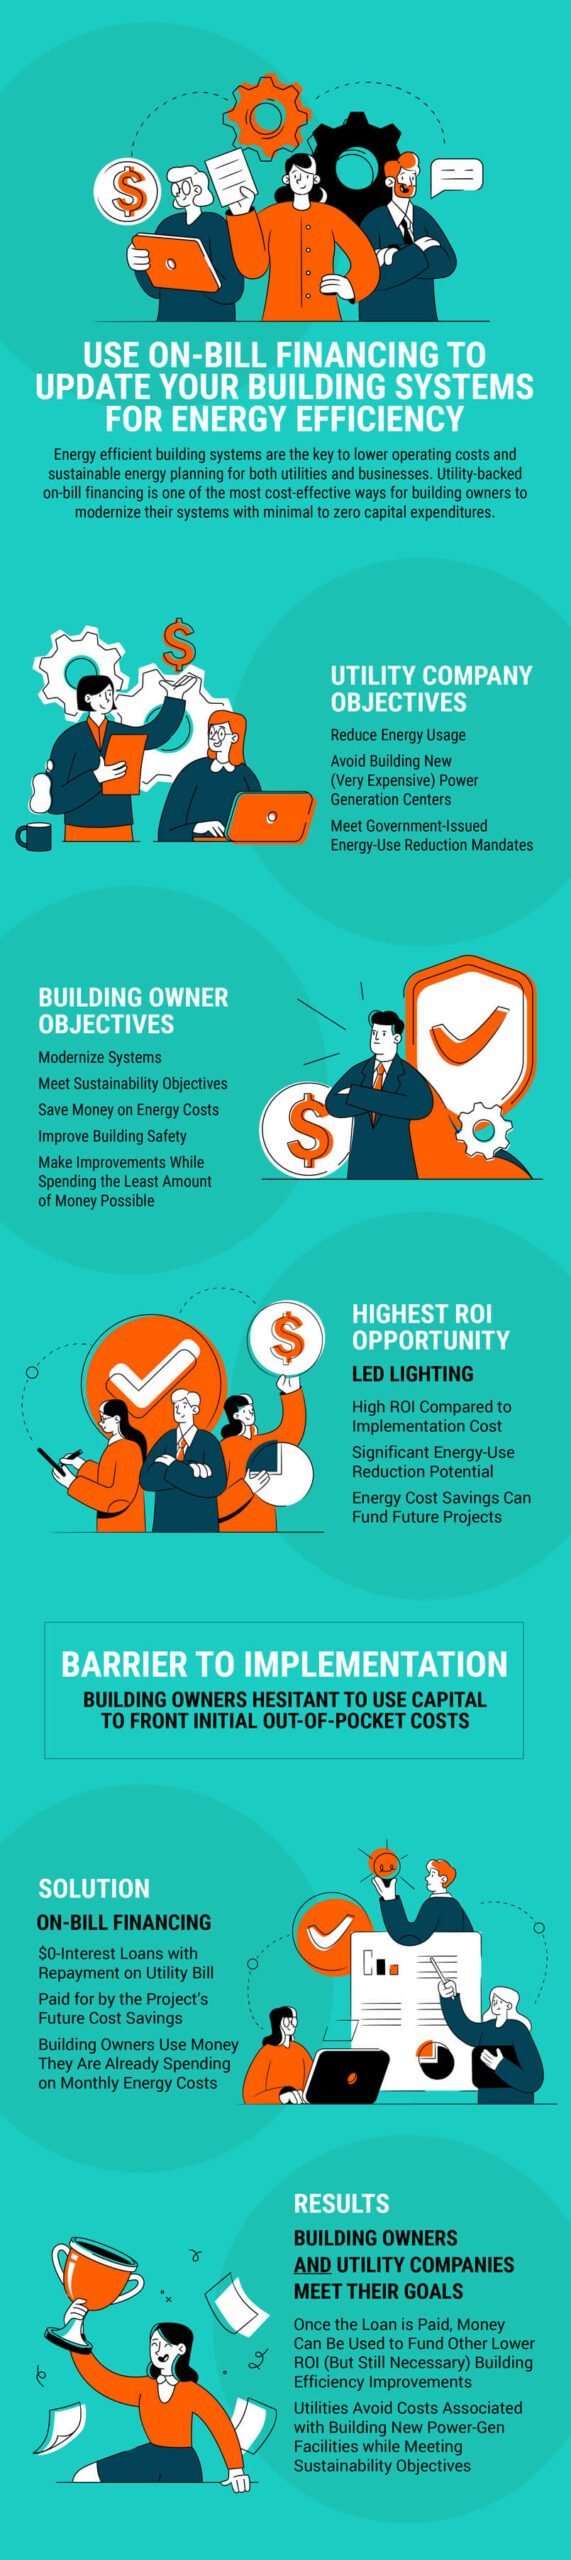 On Bill Financing Infographic